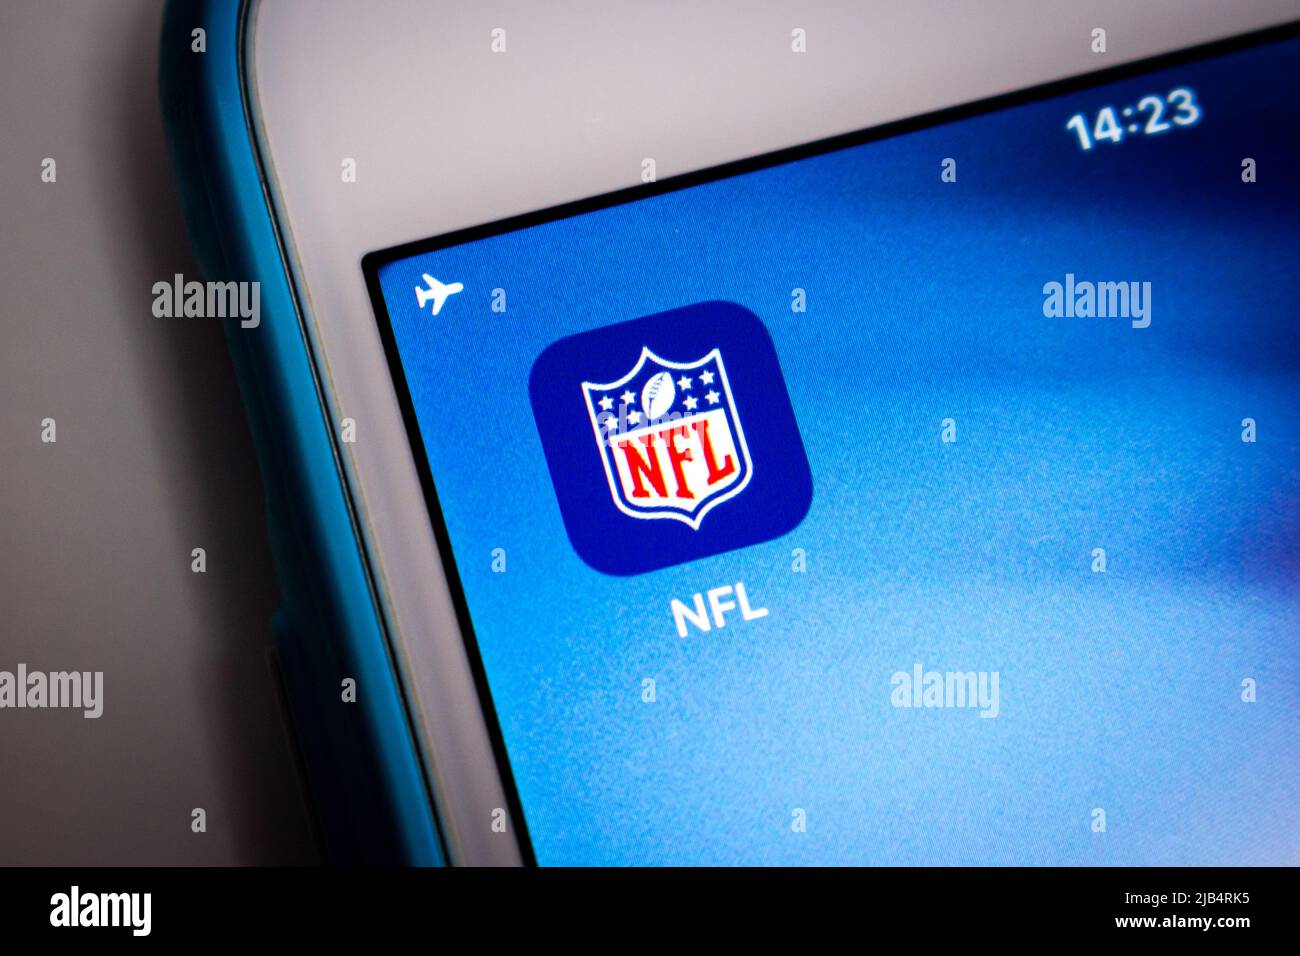 NFL (The National Football League), a pro American football league, on iOS. NFL is one of the 4 major North American professional sports leagues Stock Photo